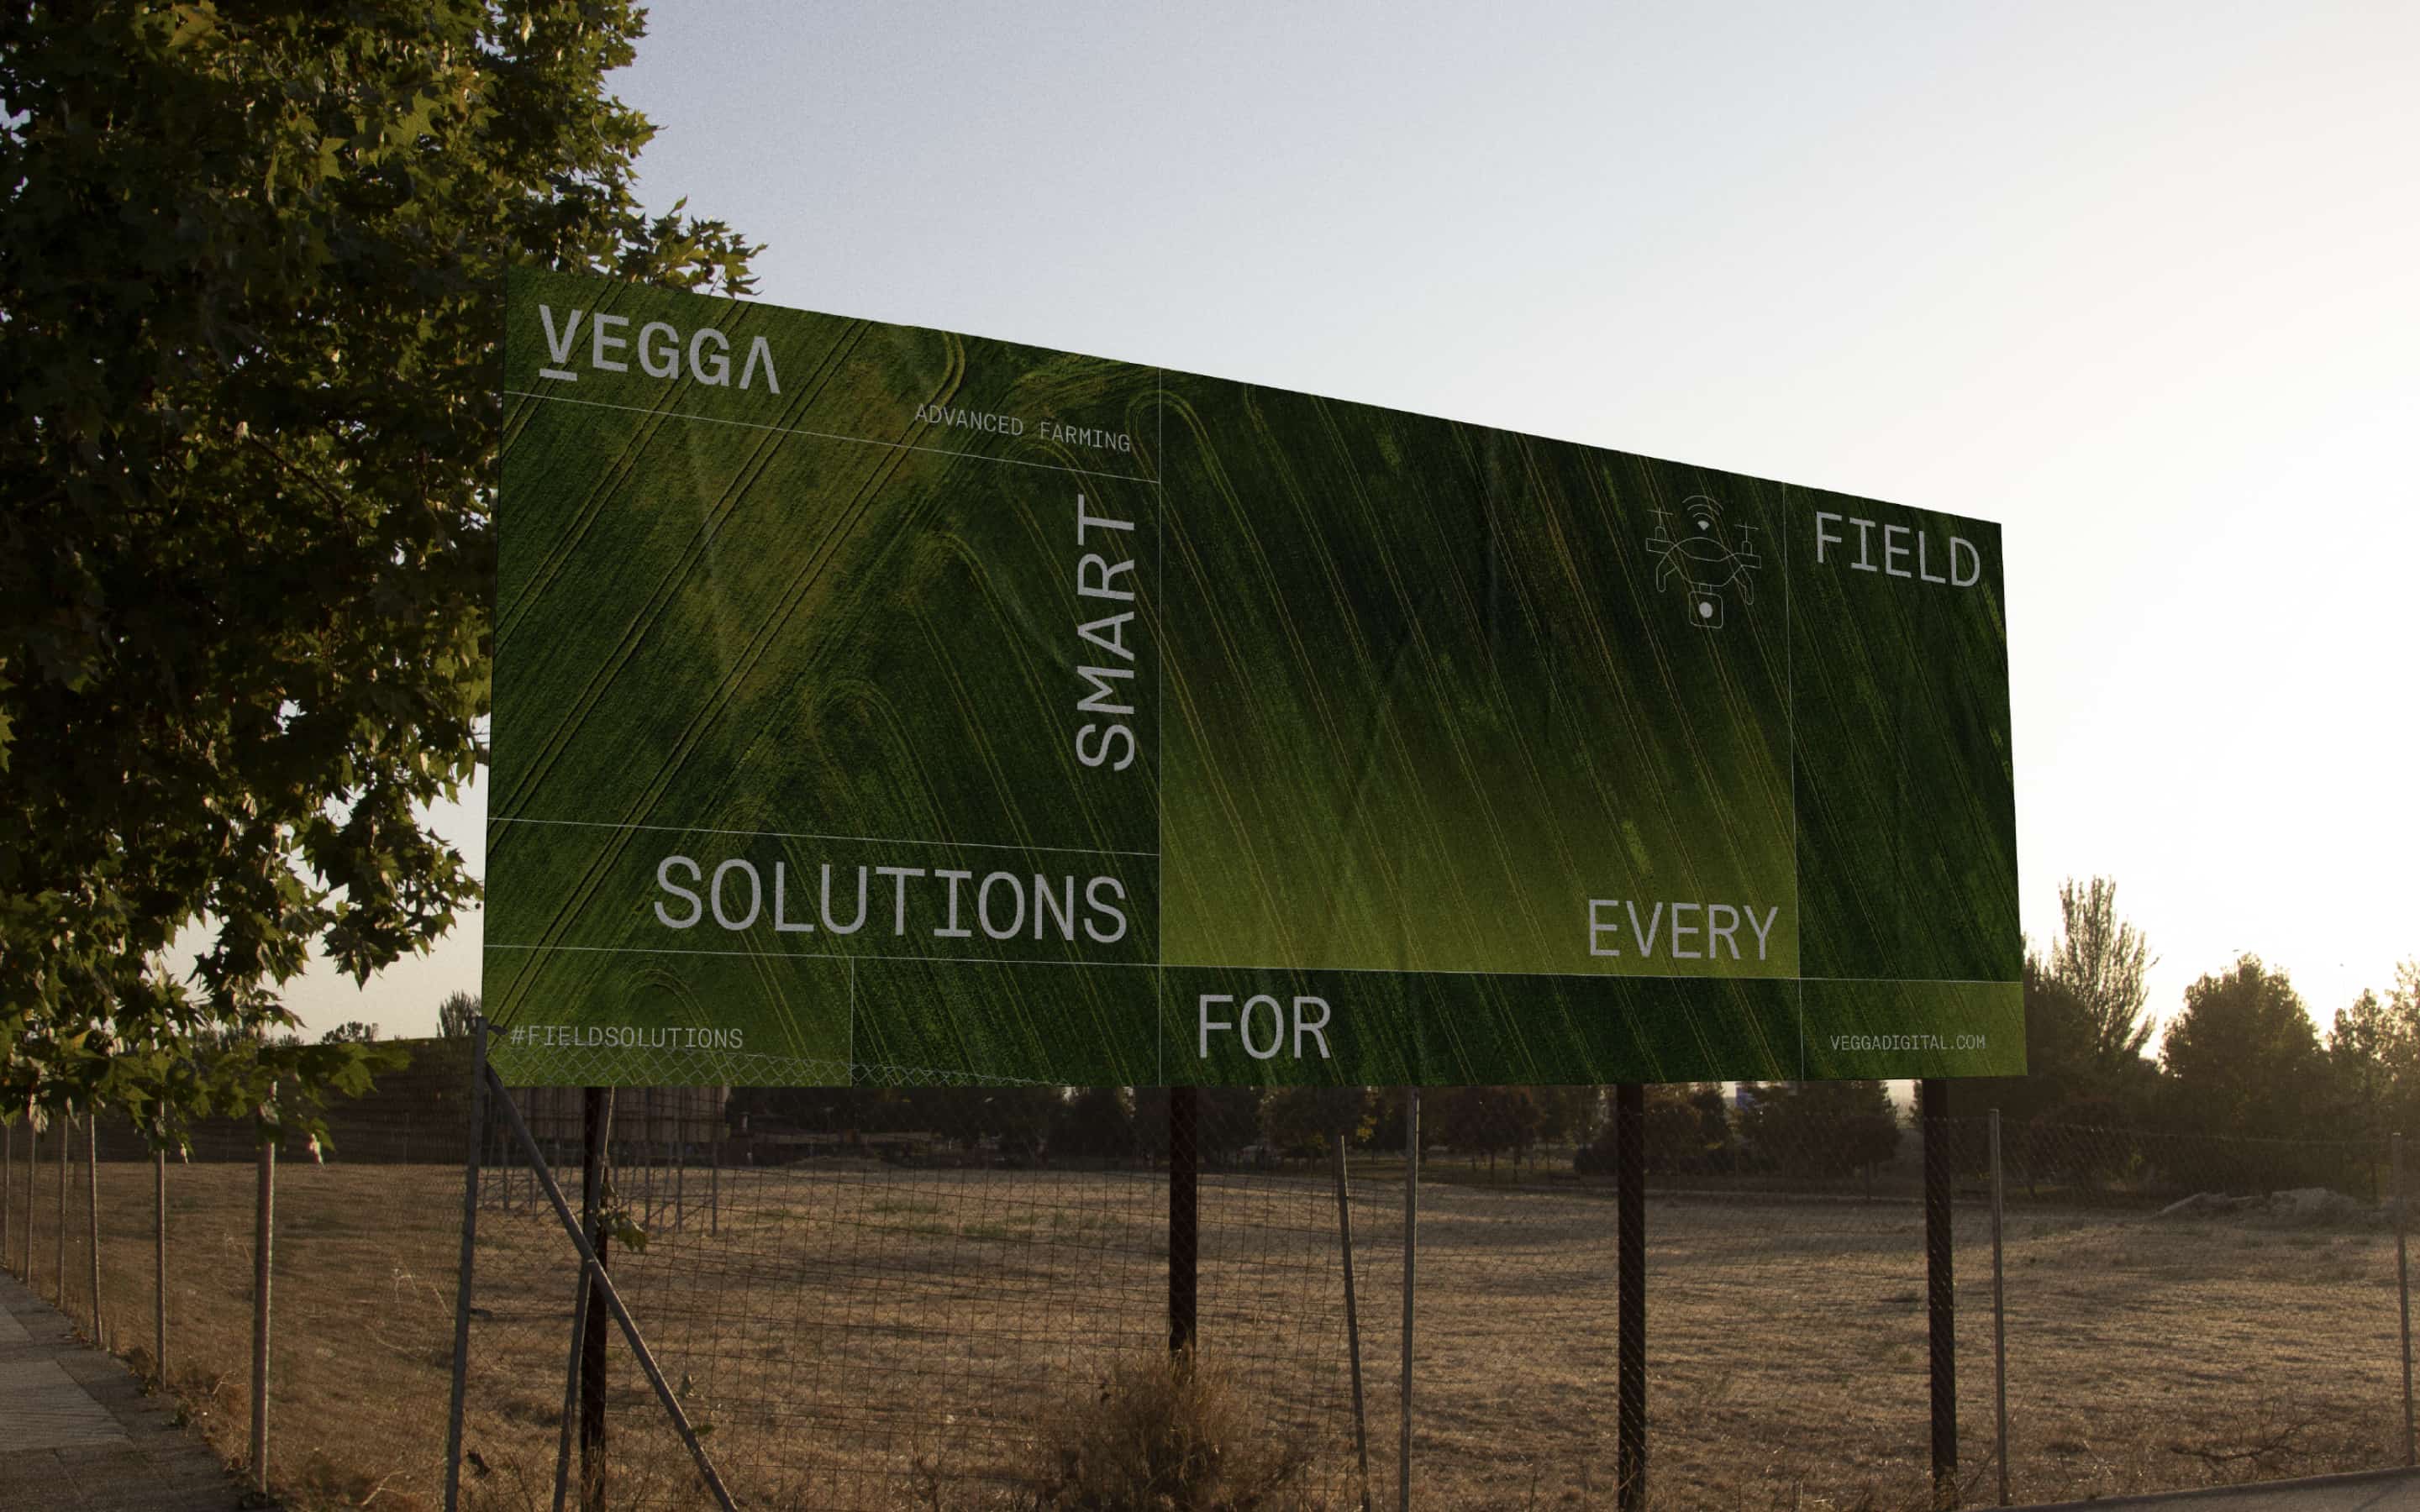 We defined the strategy and visual identity of Vegga, a brand created by MatHolding and Sistemes Electrònics Progrés. This digital platform for "Smart Farming" was born to revolutionize agriculture in an efficient and sustainable way.
